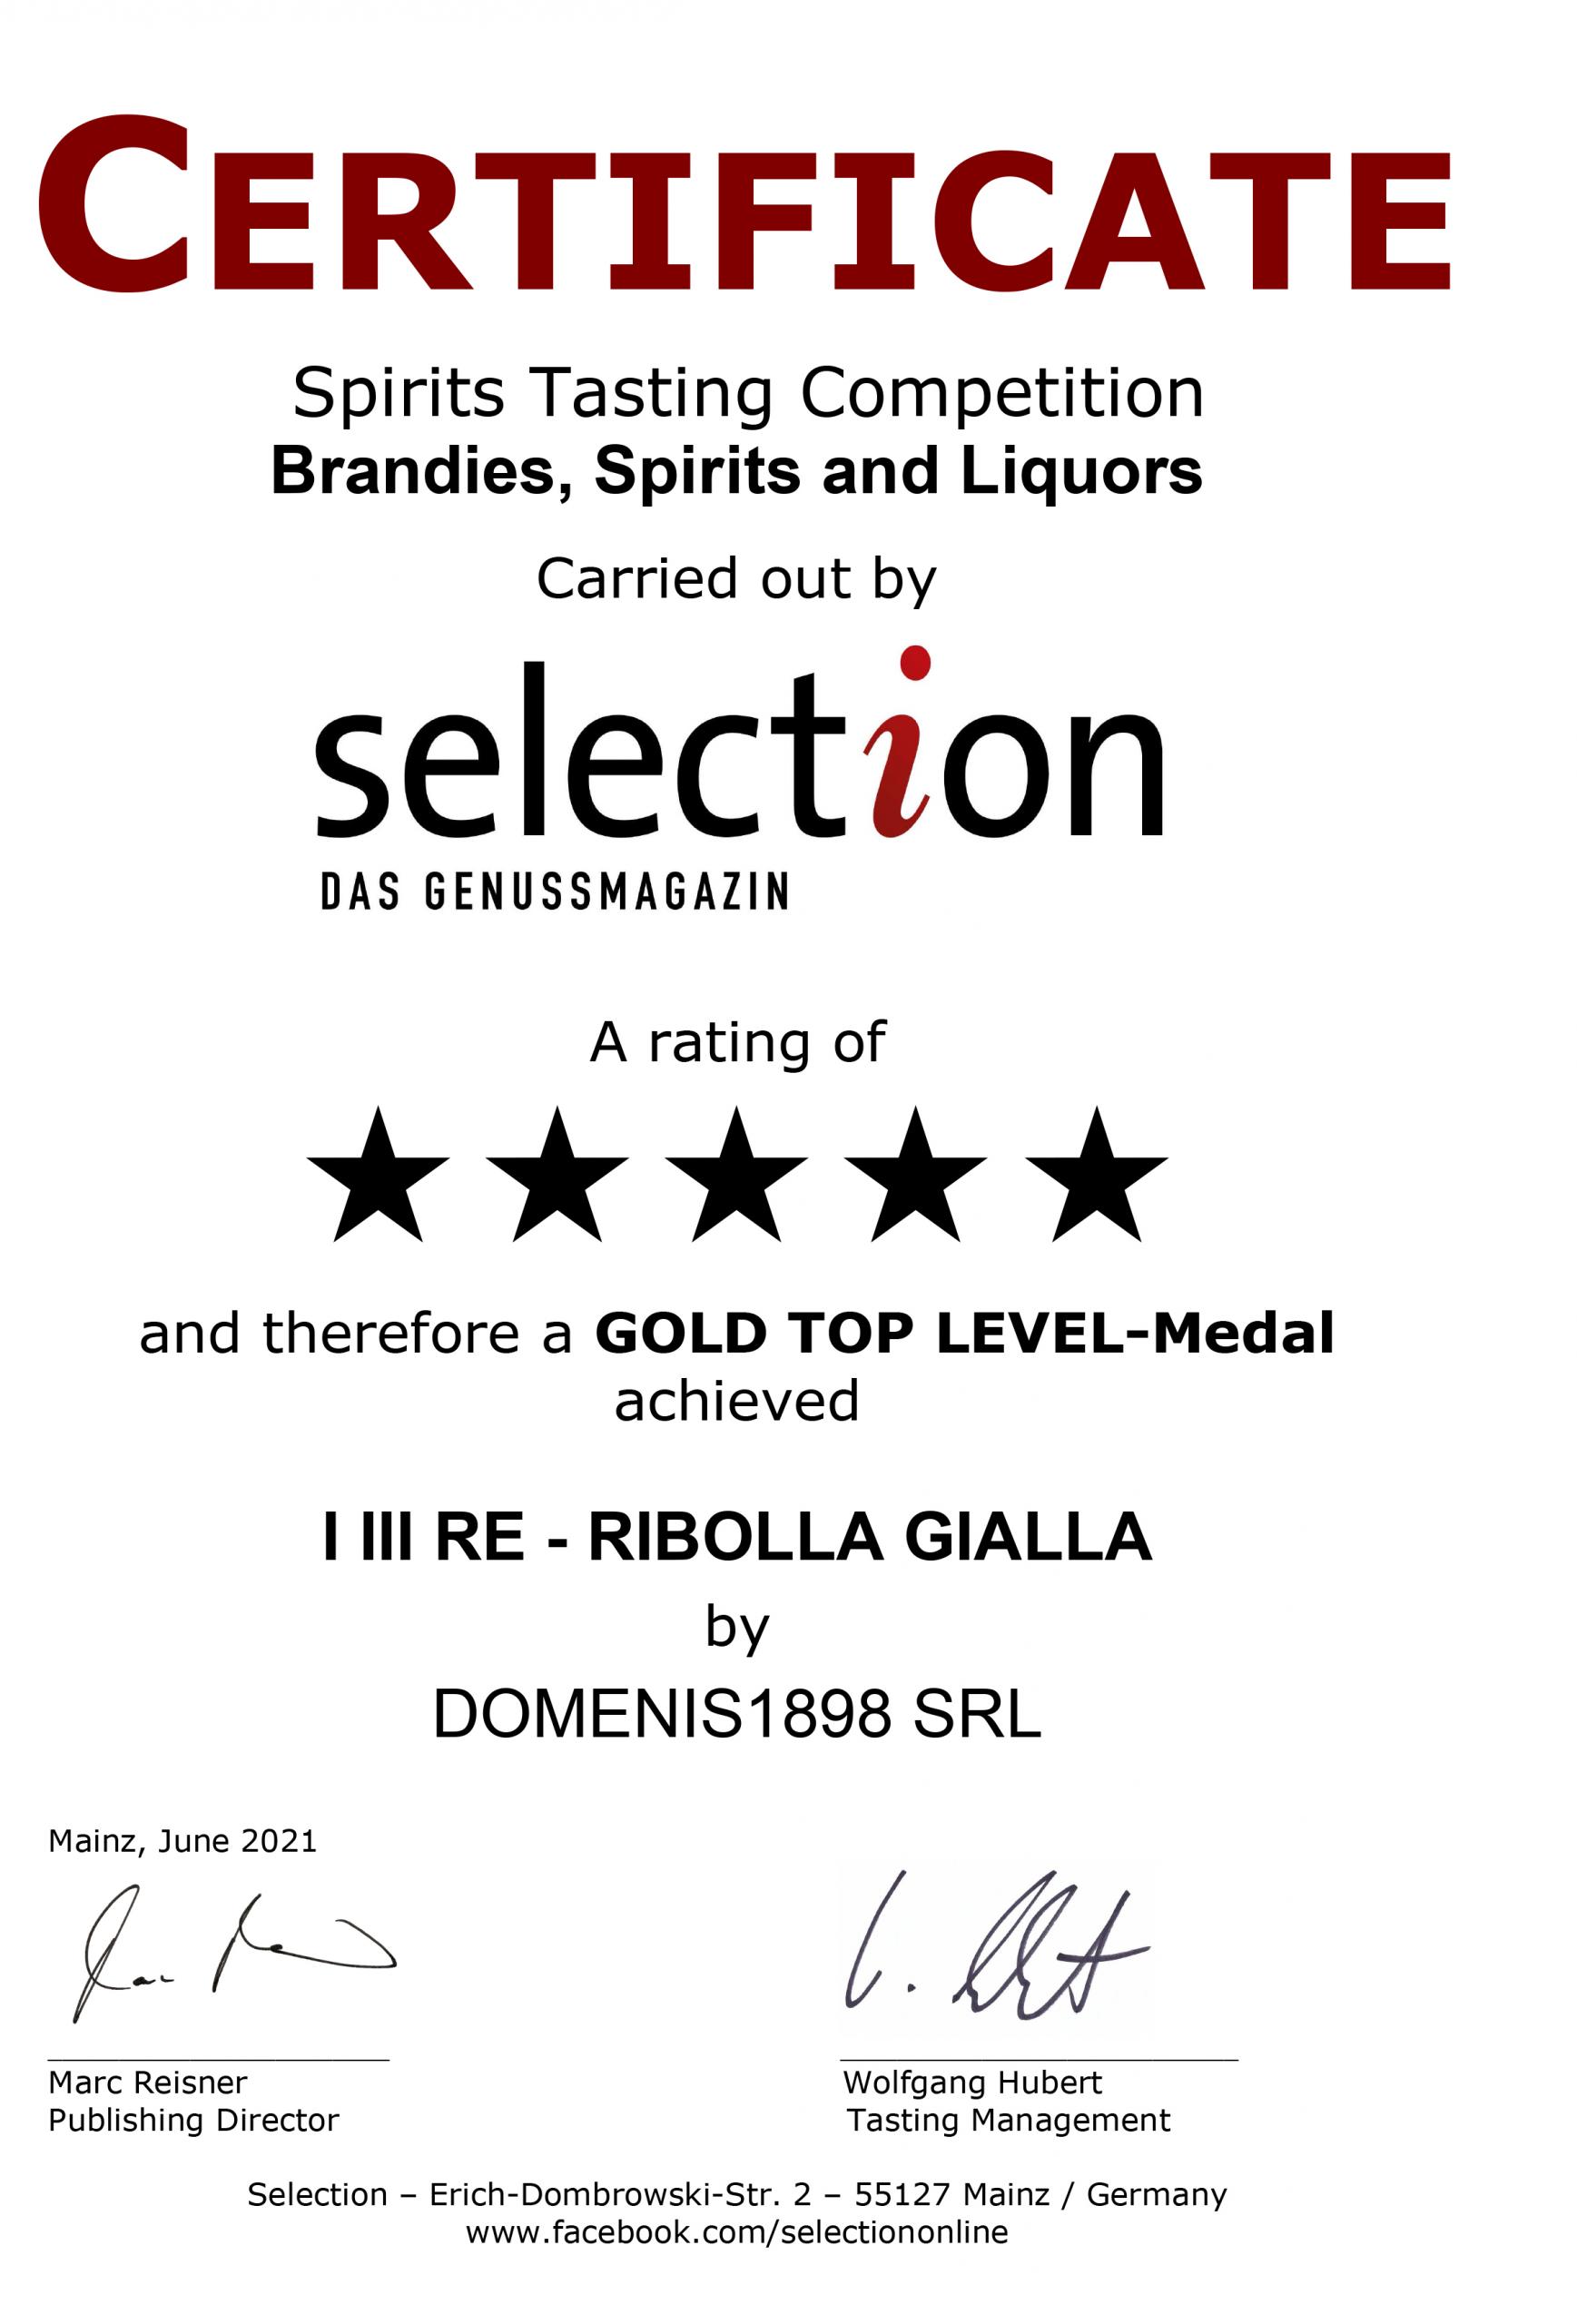 Selection aus Genussmagazin 2021 – Gold Top-Level Medal – I III Re Ribolla gialla